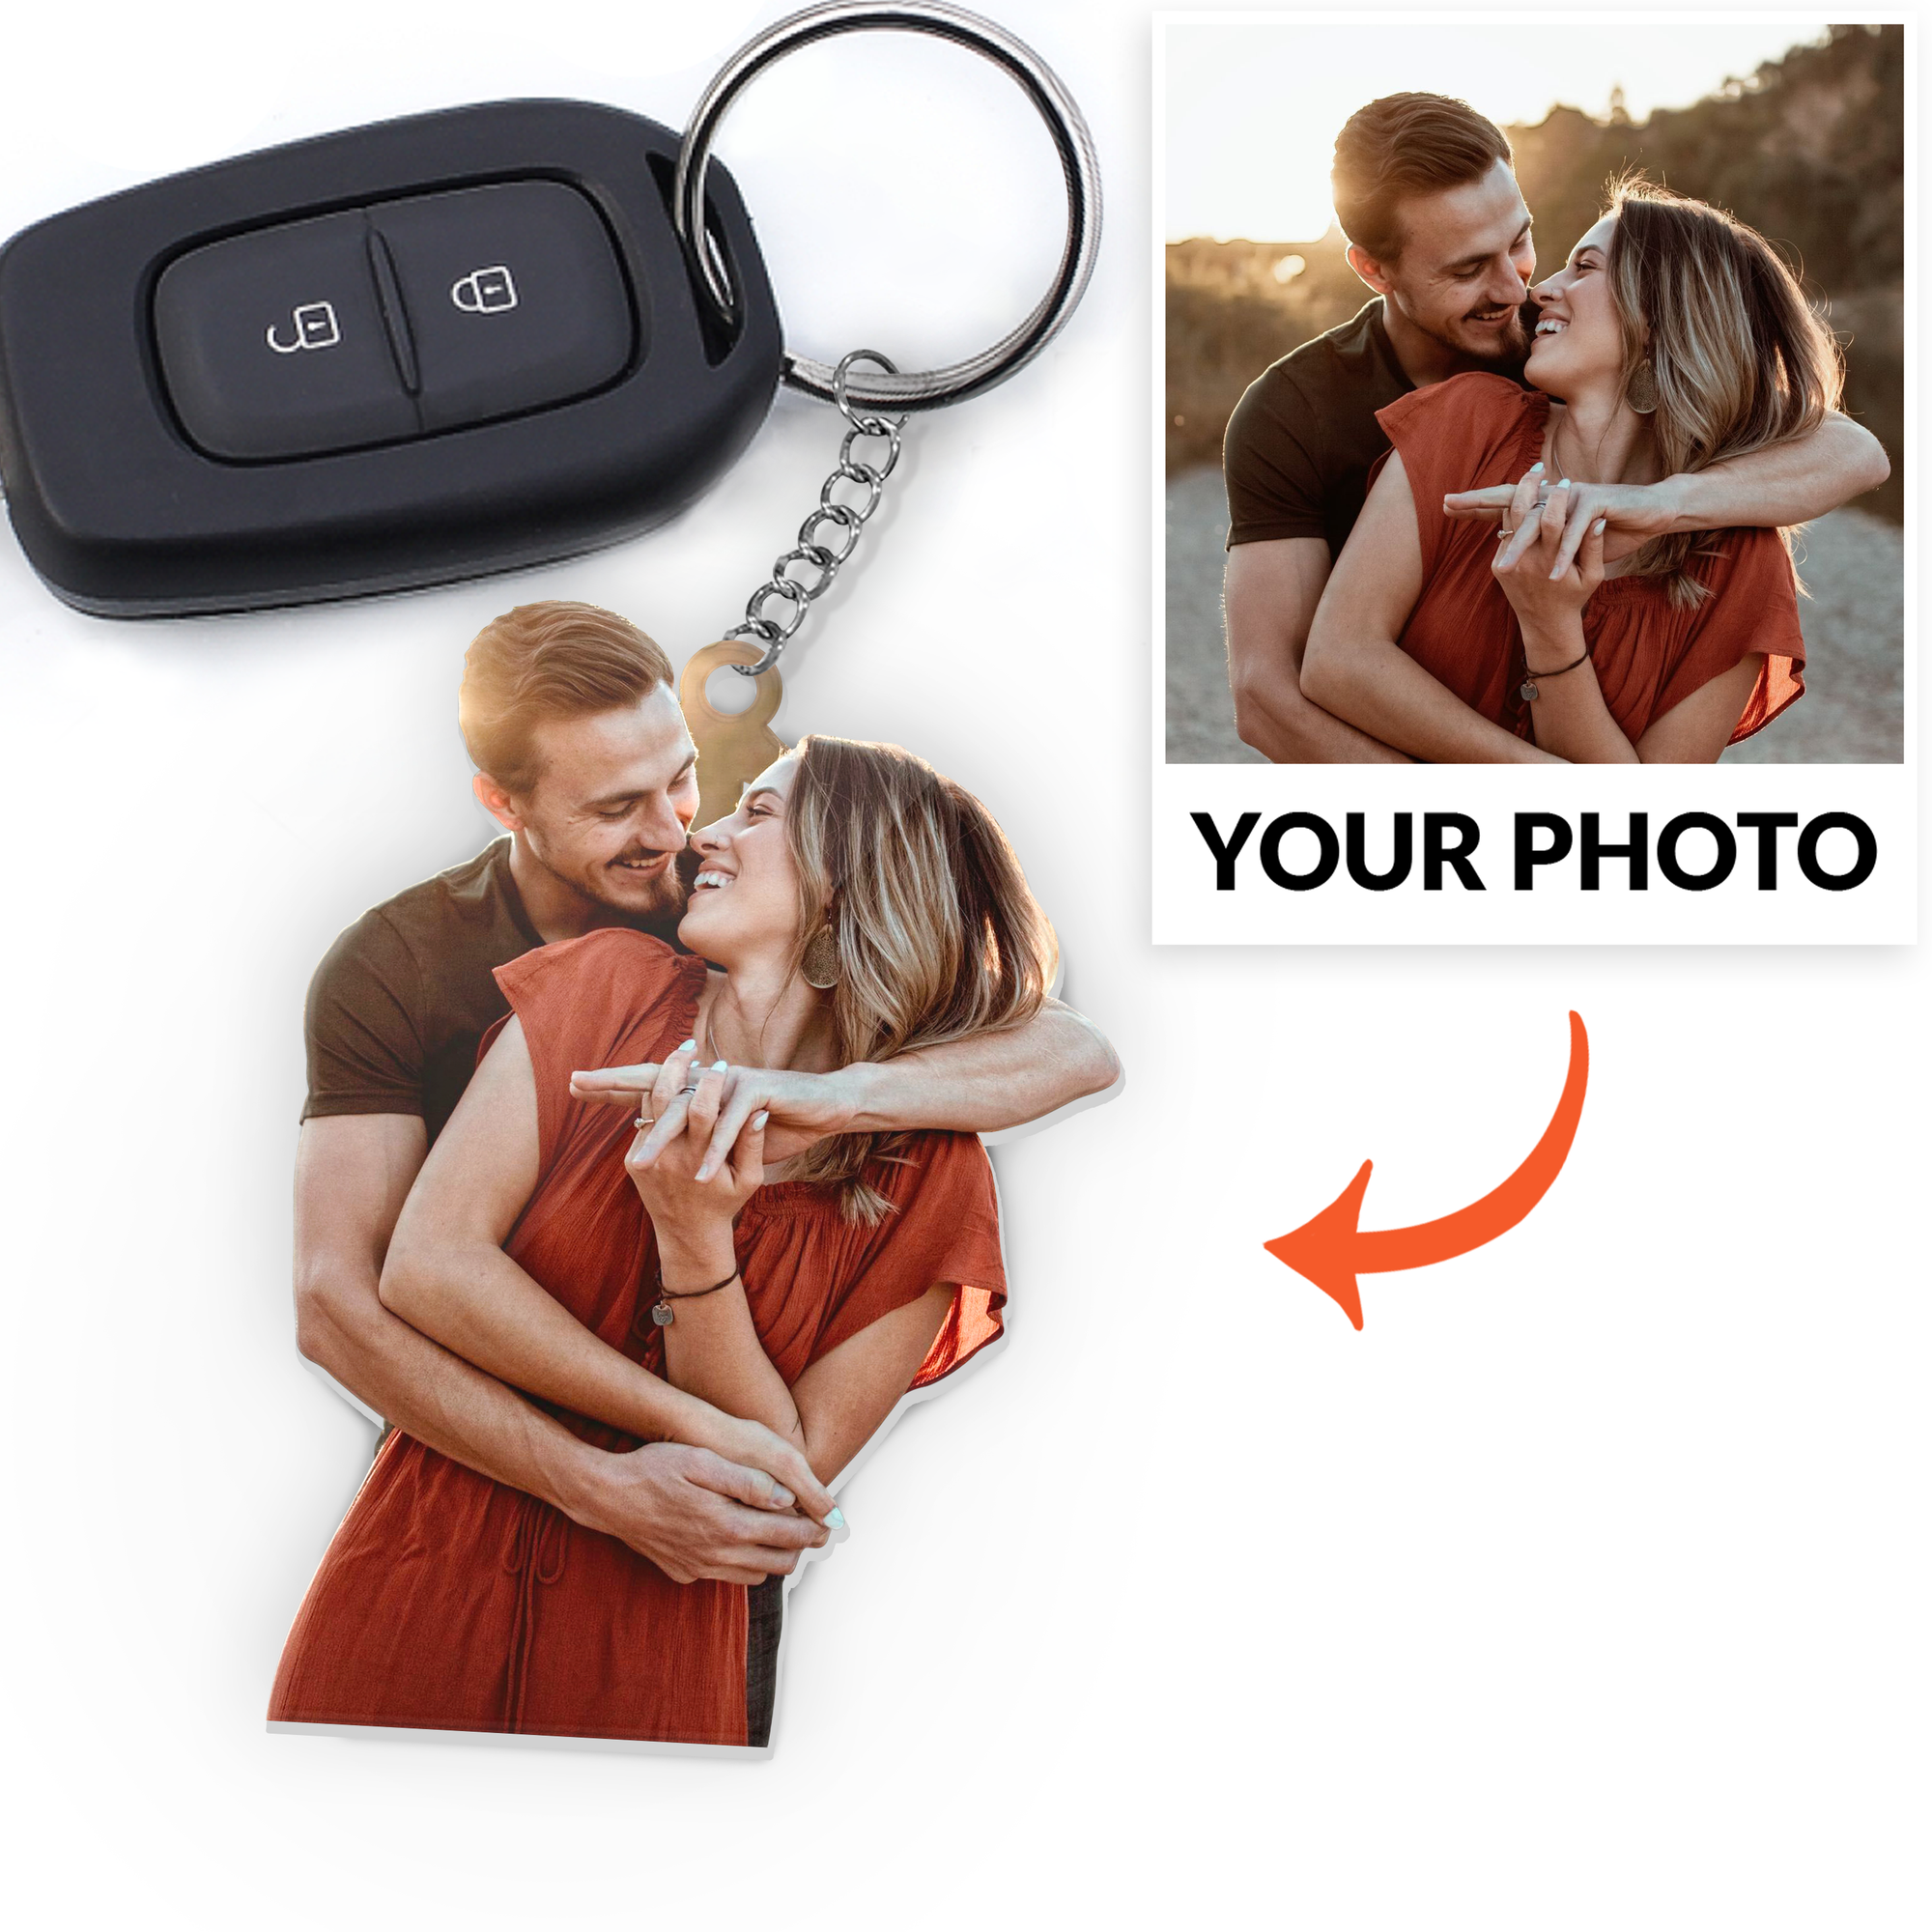 CUSTOMIZED KEYCHAIN - GIFT FOR COUPLES - CUSTOMIZED YOUR PHOTO